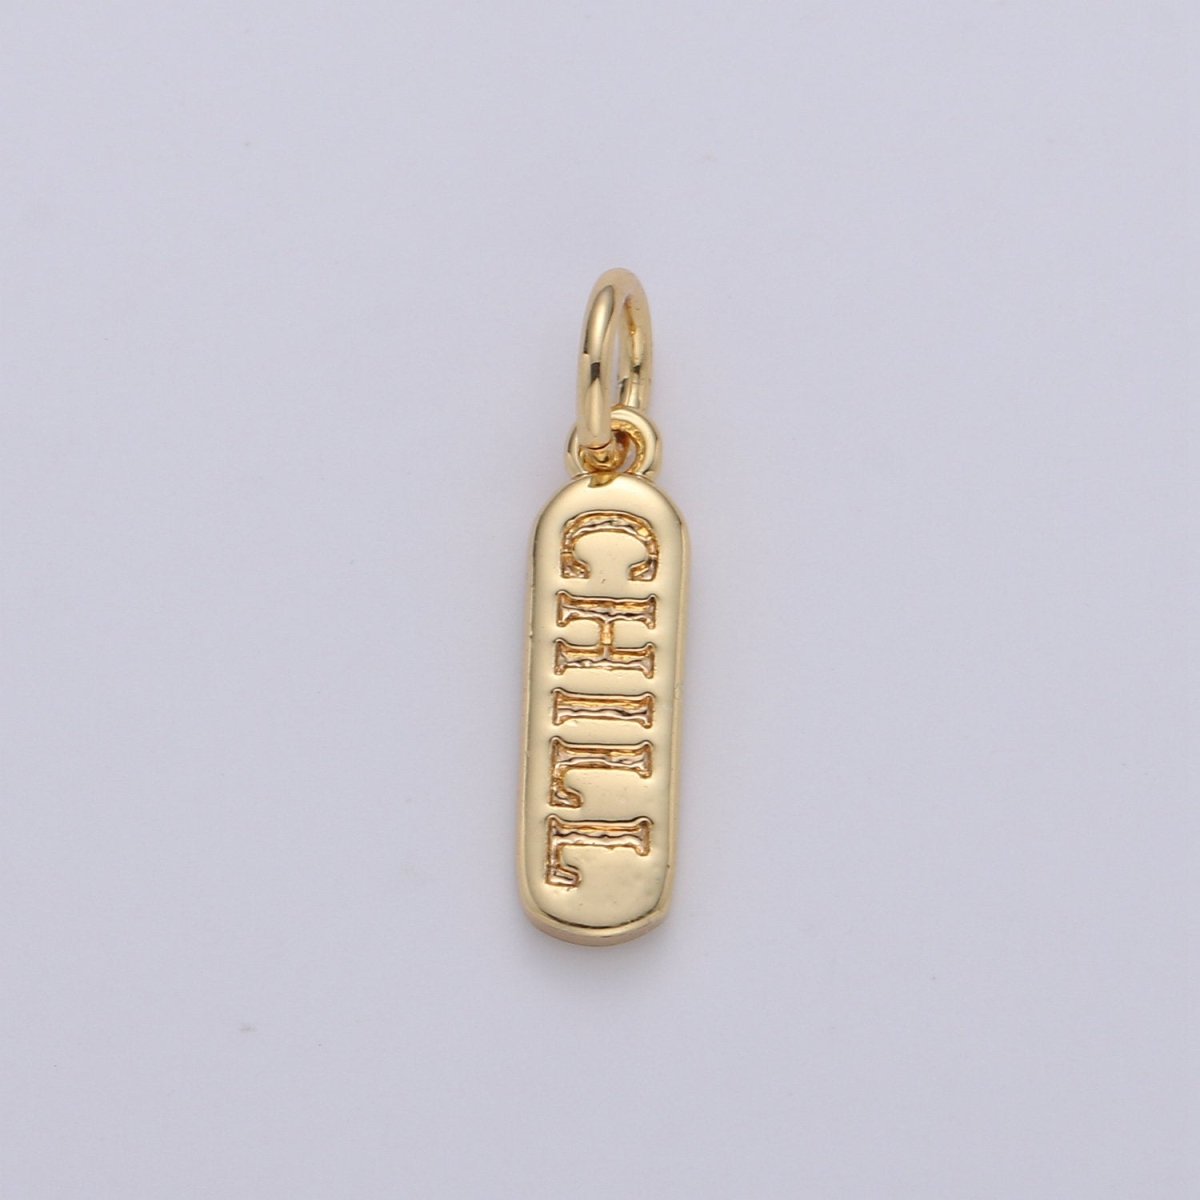 Dainty Gold Pill Bar Pendant, love mom hope happy chill words charm, 14K Gold Filed Pendant for Bracelet Necklace Earring Component Supply | D-506, D-323-D-330, D-747 - DLUXCA